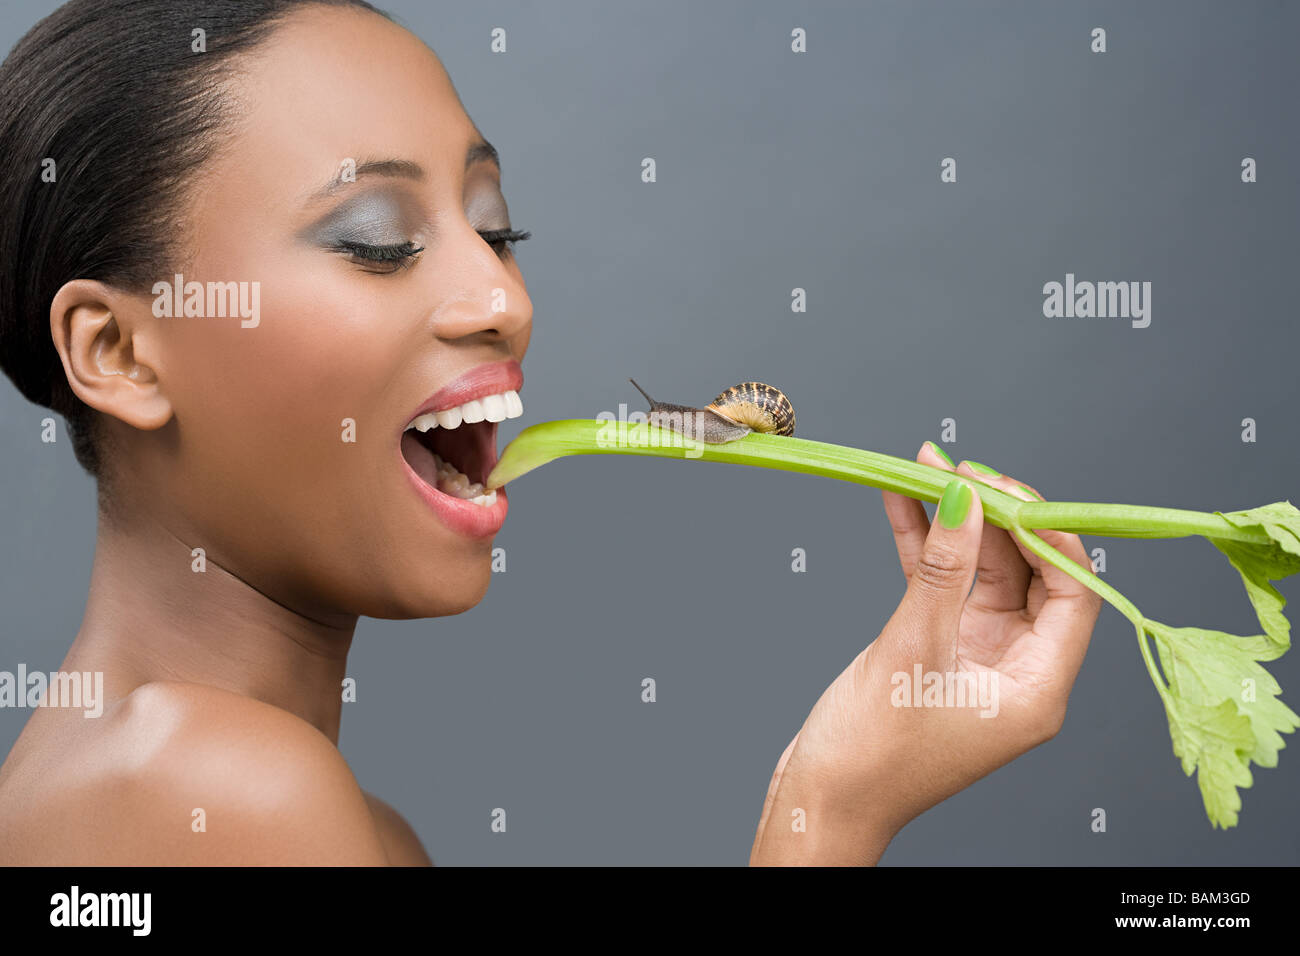 Woman eating a stick of celery with a snail on it Stock Photo